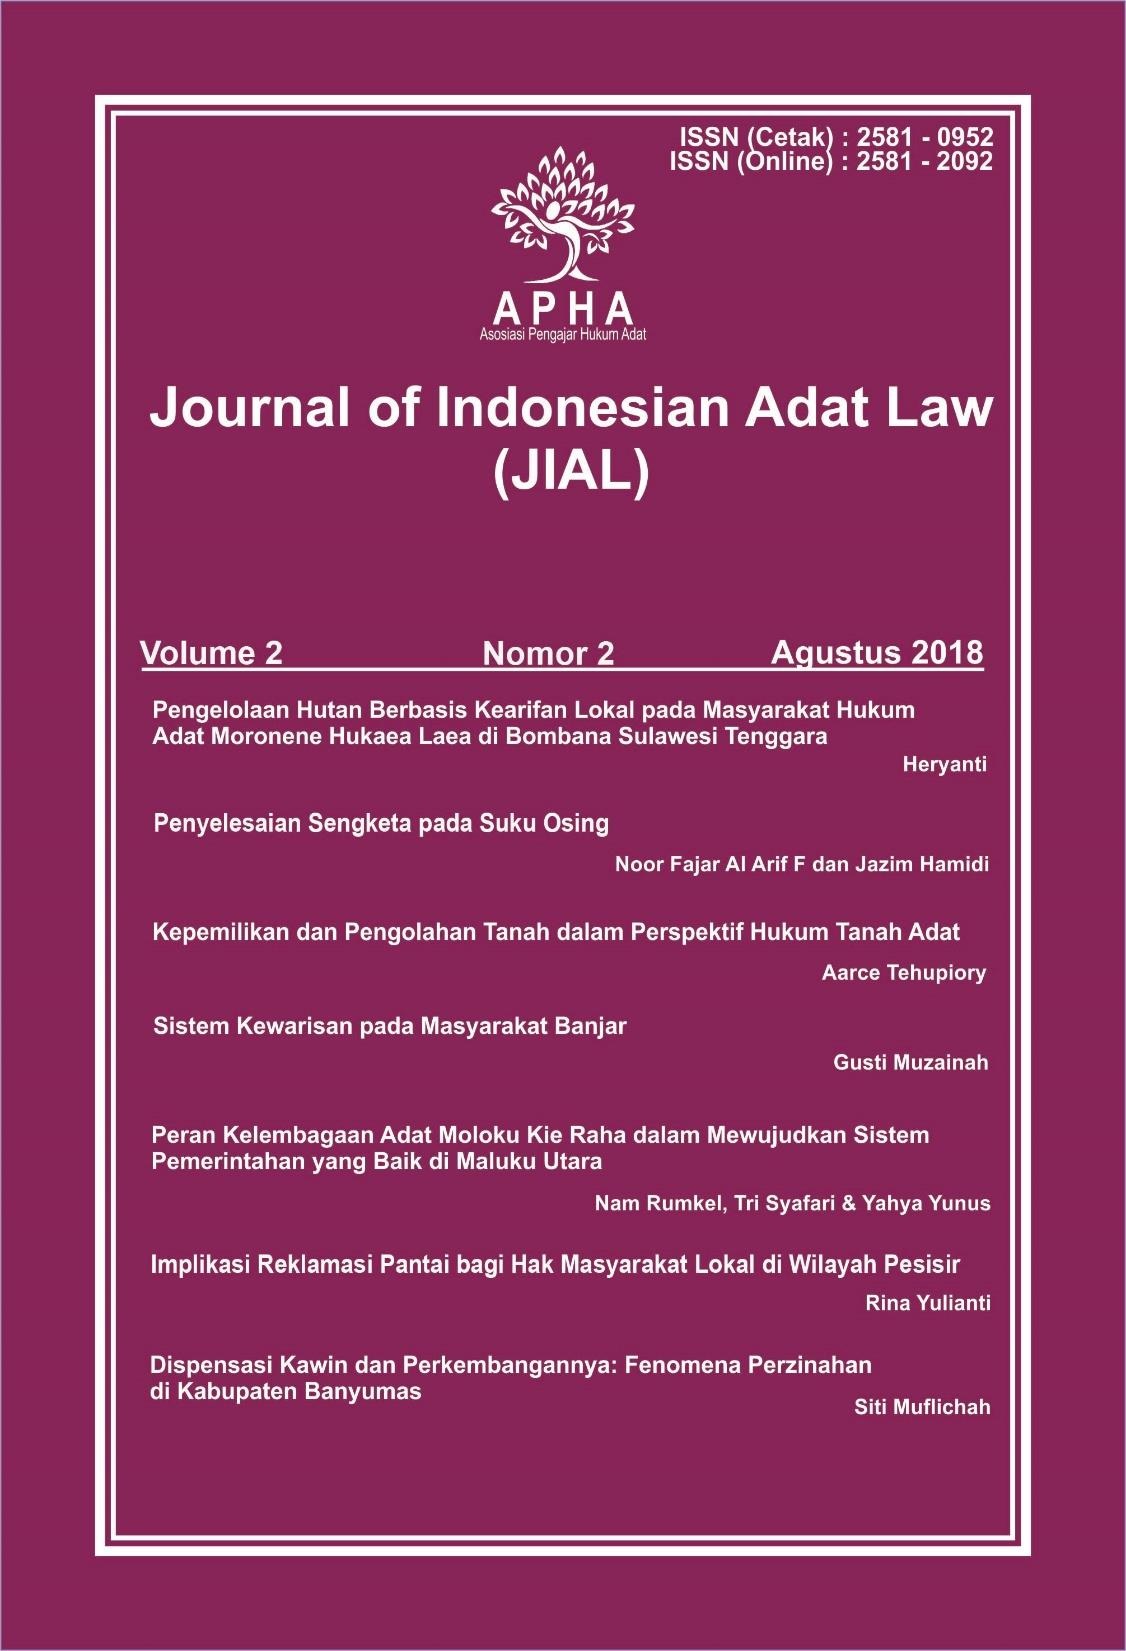 					View Vol. 2 No. 2: Journal of Indonesian Adat Law
				